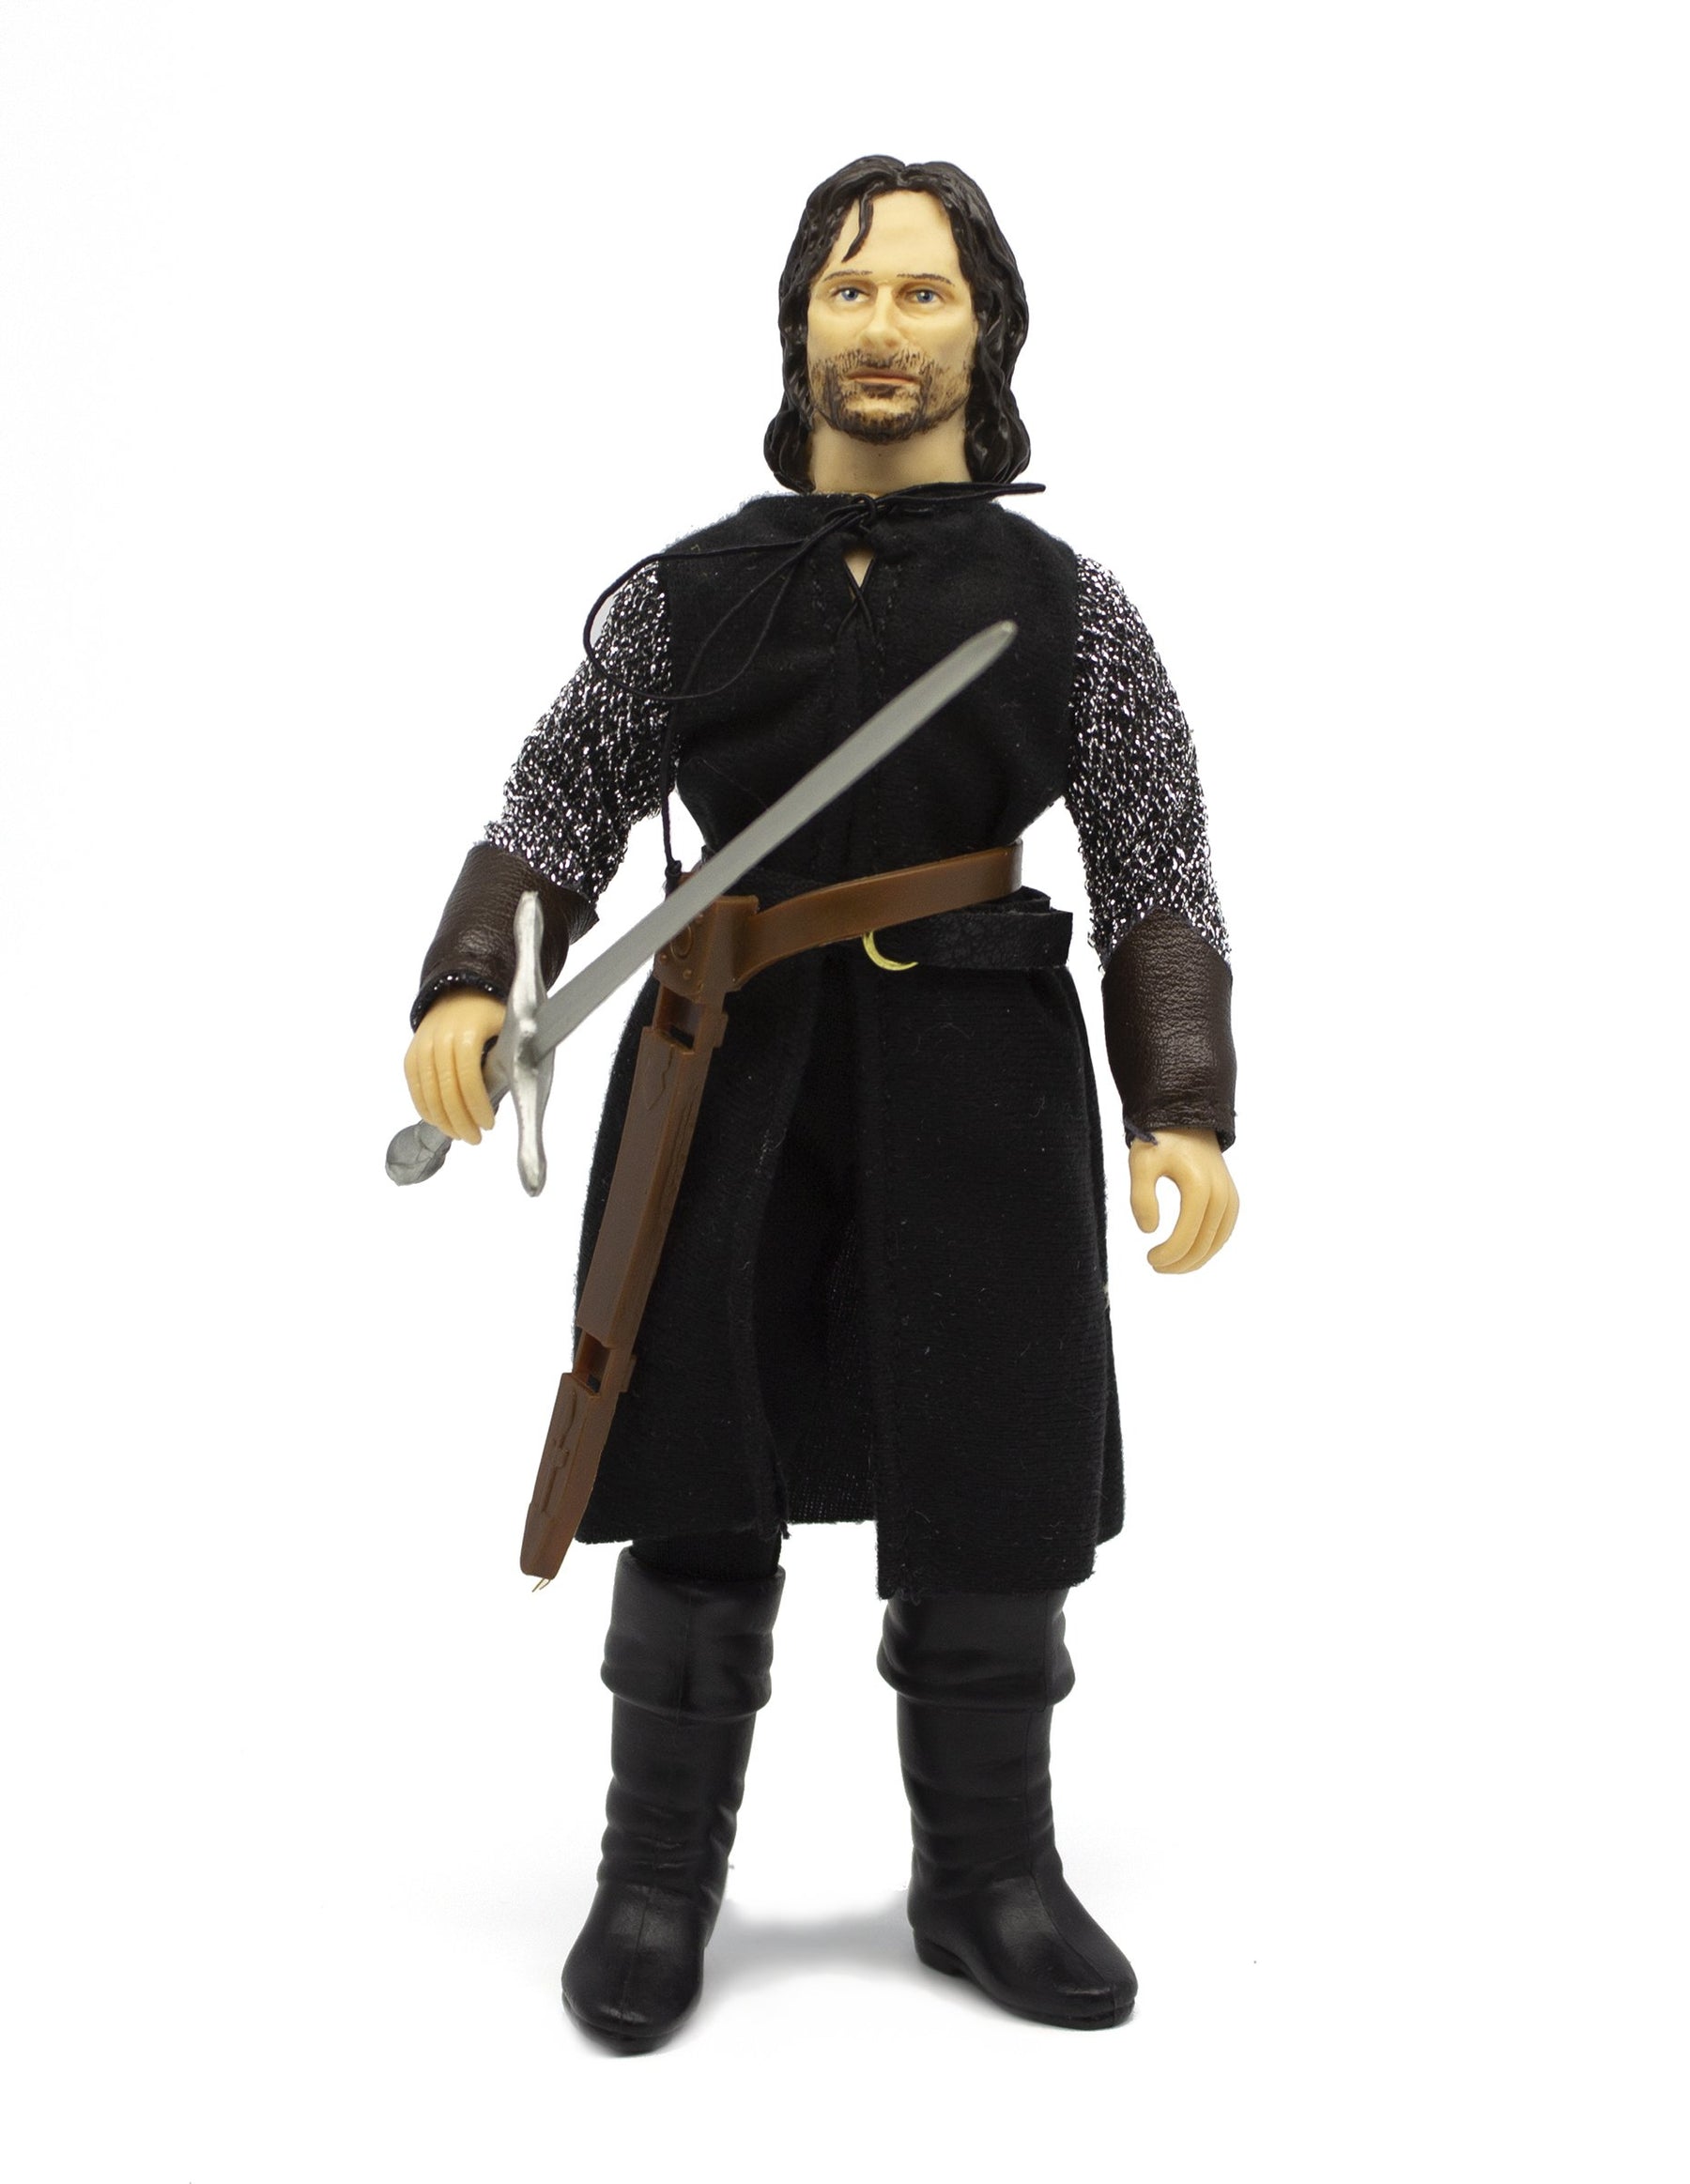 Mego Movies Lord of The Rings - Aragorn 8" Action Figure - Zlc Collectibles